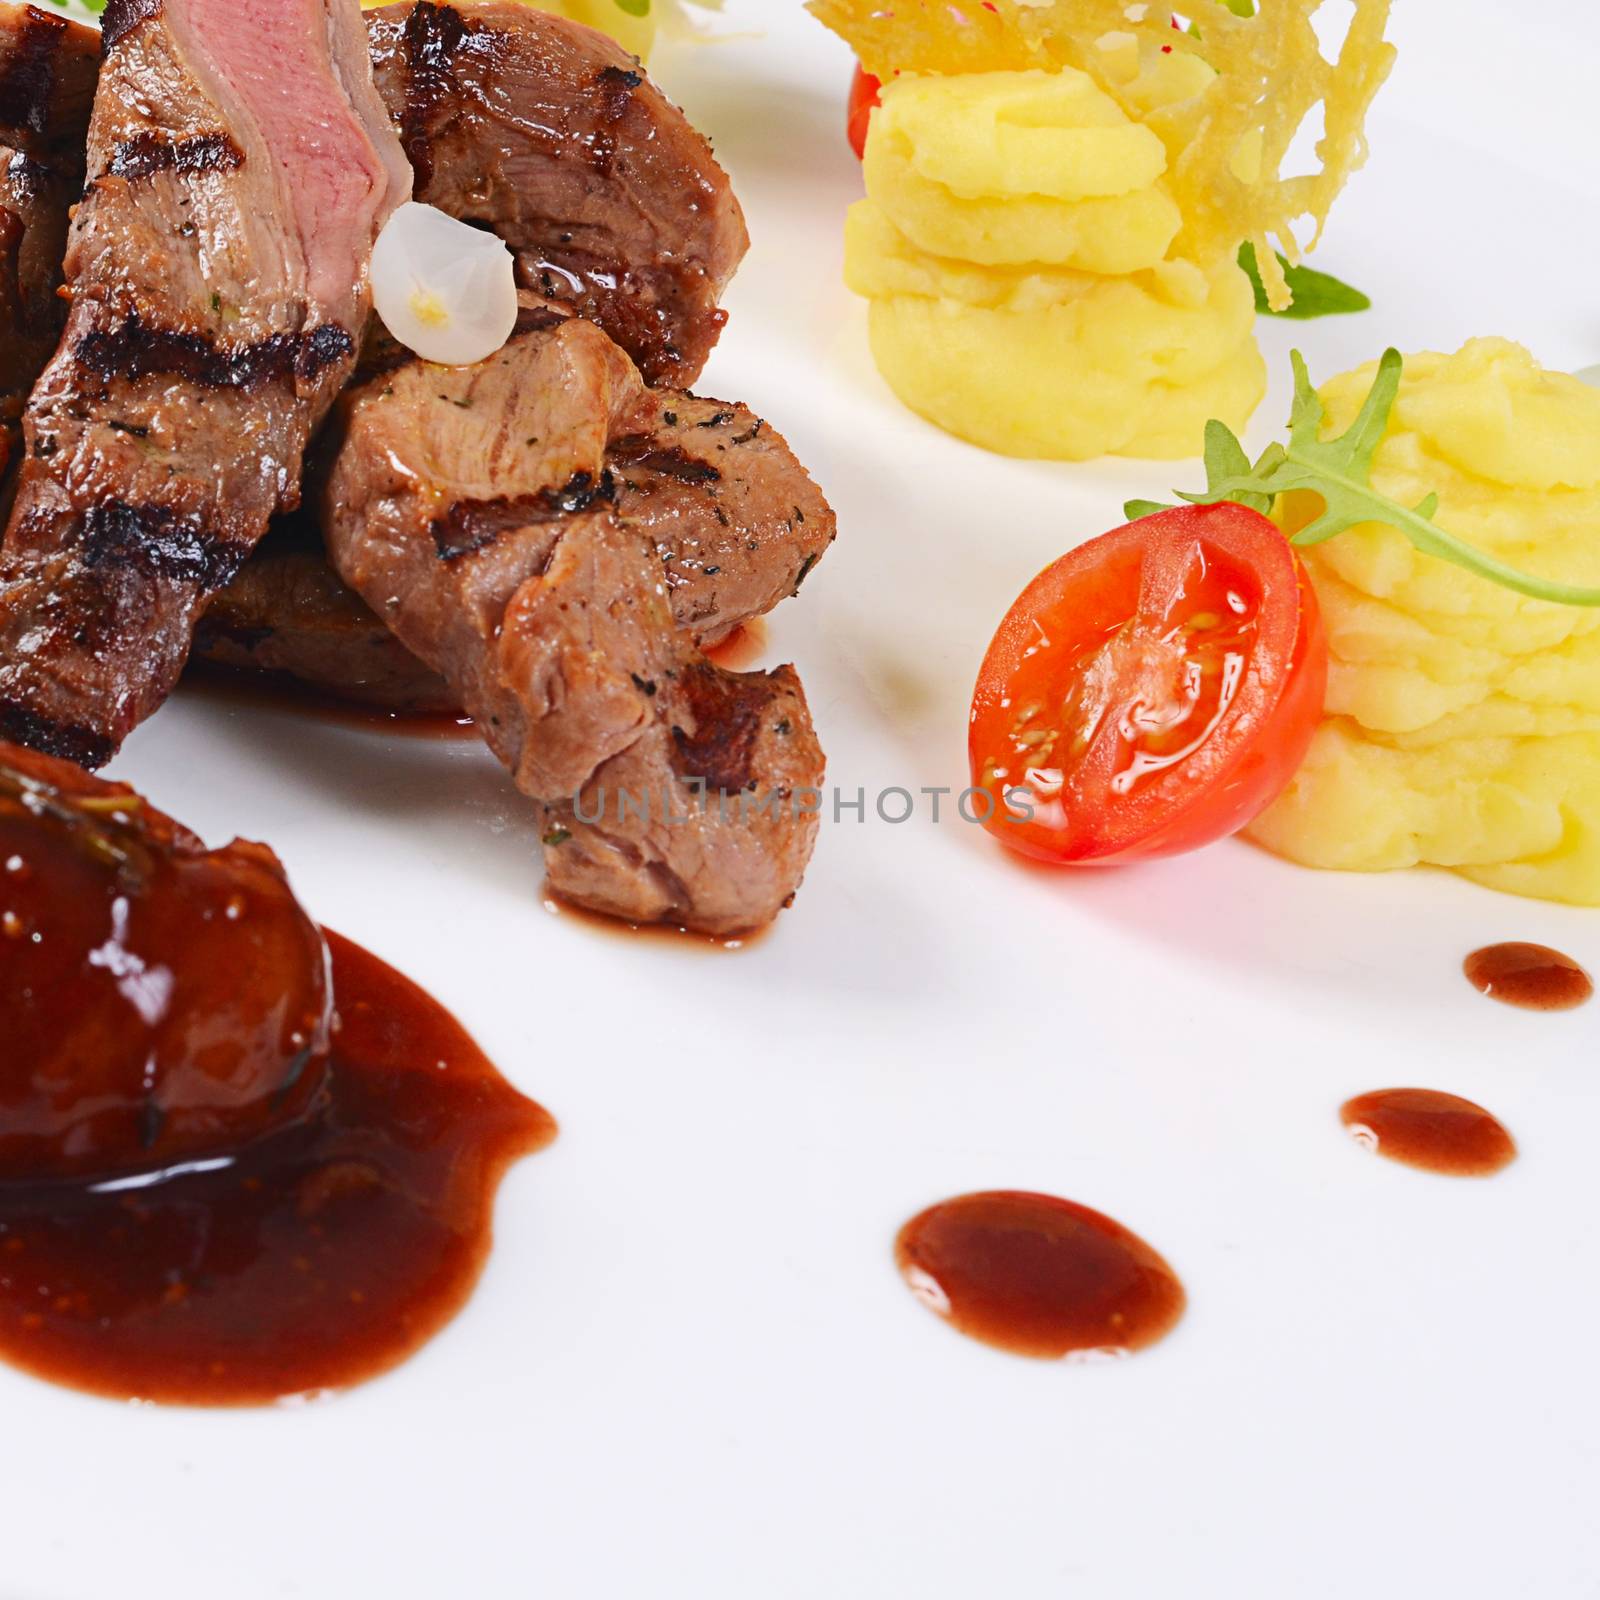 Tenderloin of veal with sauce of figs